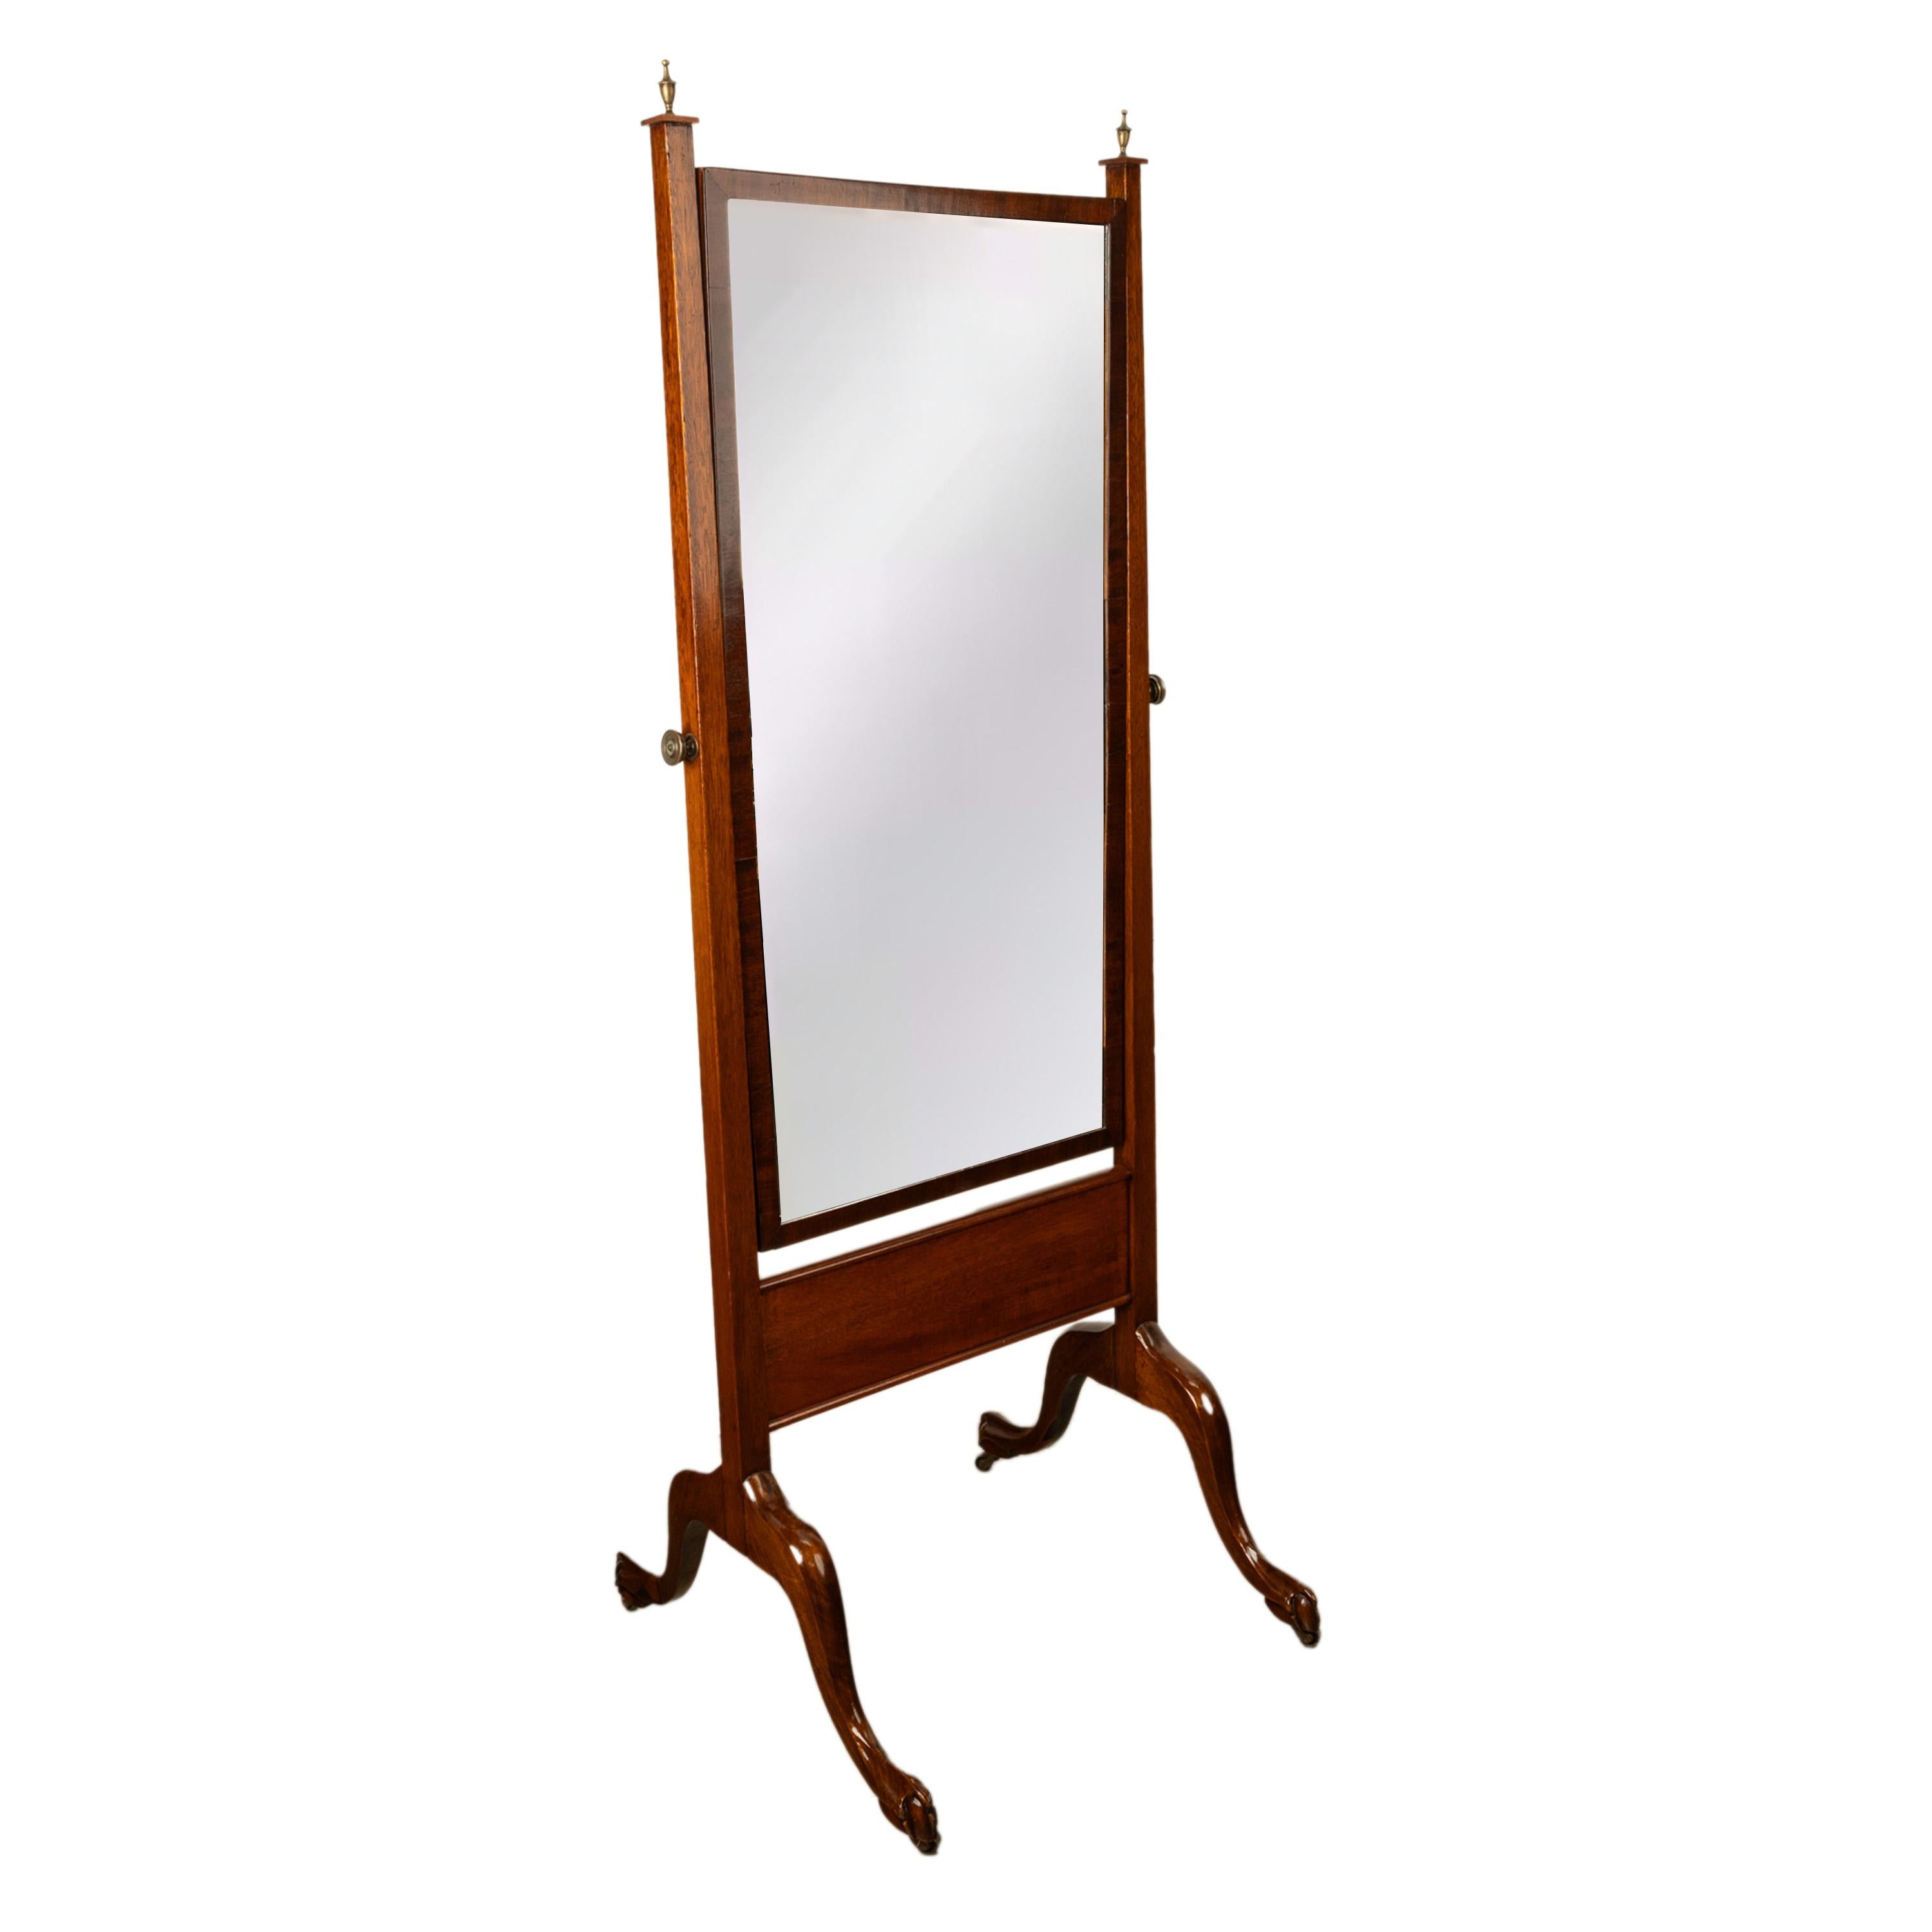 Antique English Georgian Regency Mahogany Cheval Full Length Swing Mirror 1820 In Good Condition For Sale In Portland, OR